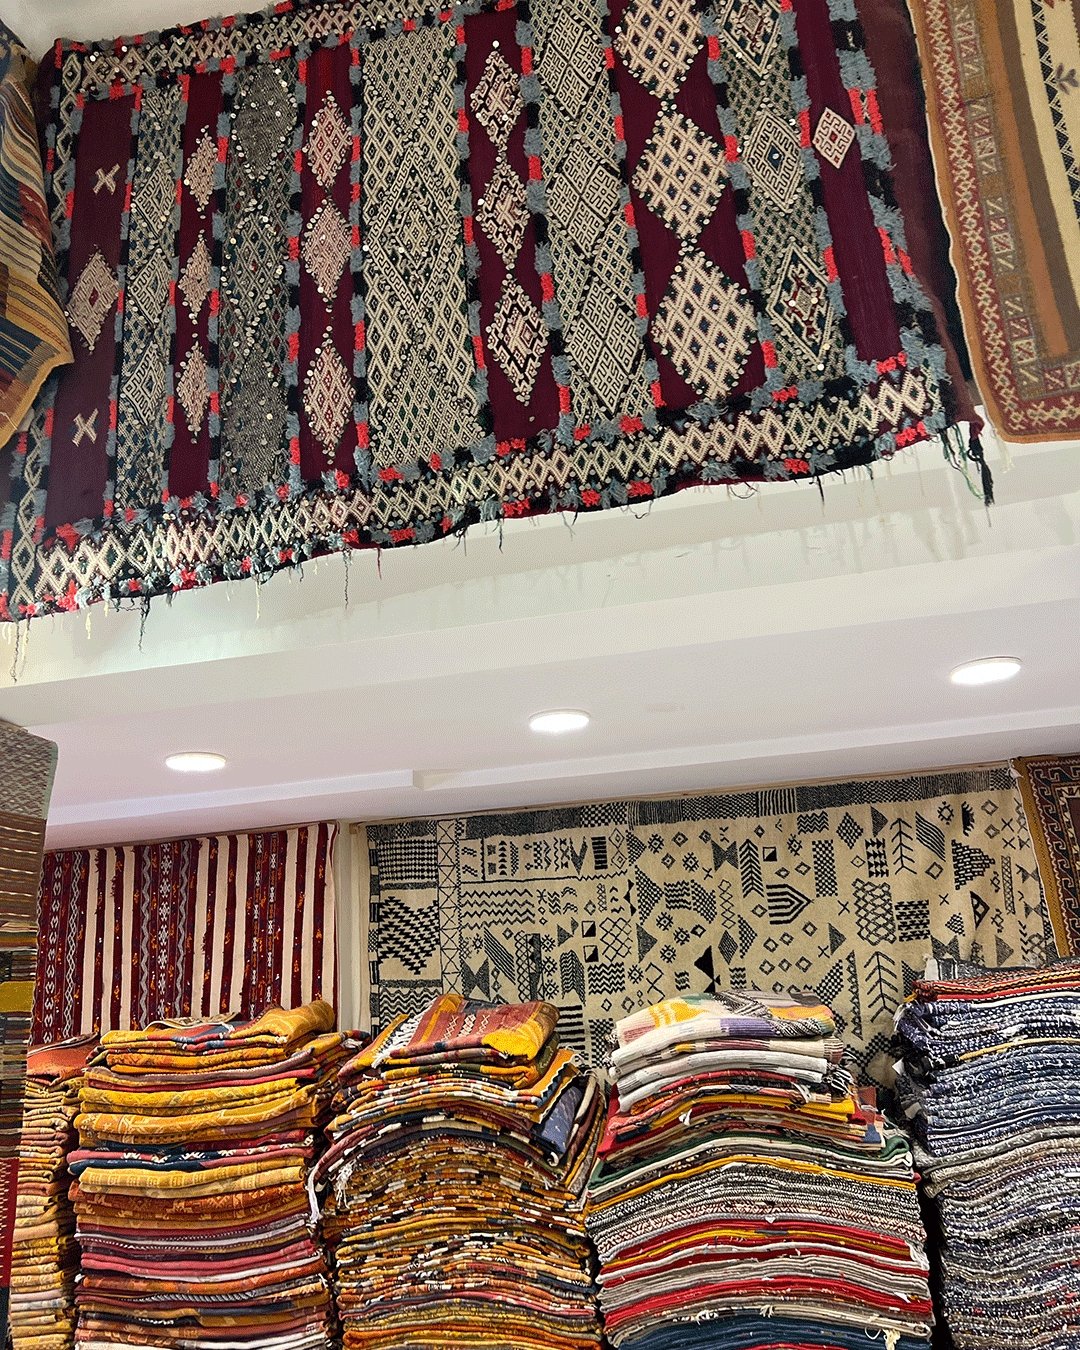 Where to shop in Marrakech